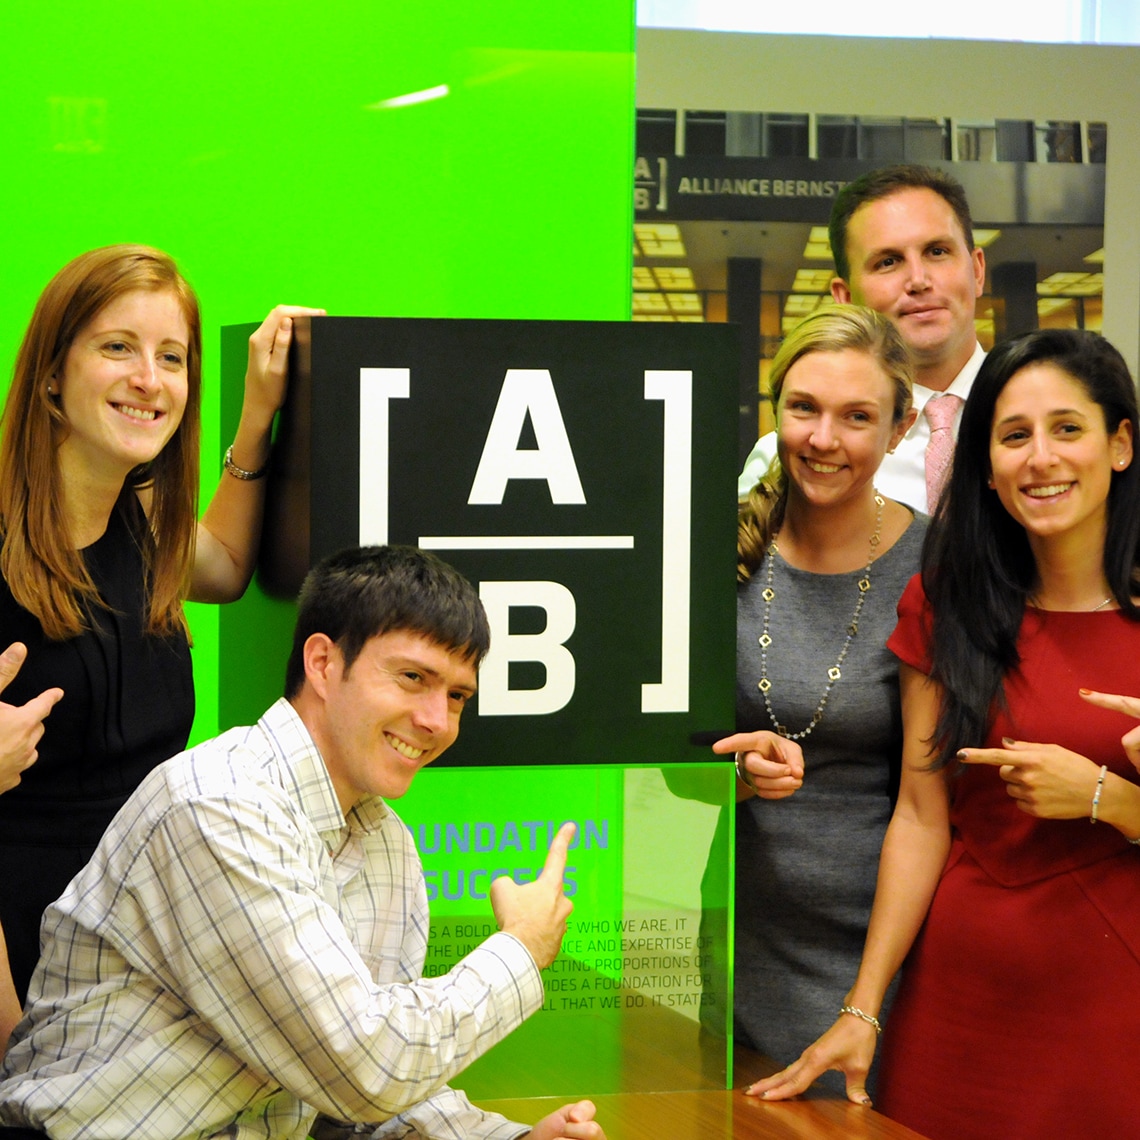 employees taking a photo at the brand's launch event, pointing to the new logo developed for AB (AllianceBernstein)